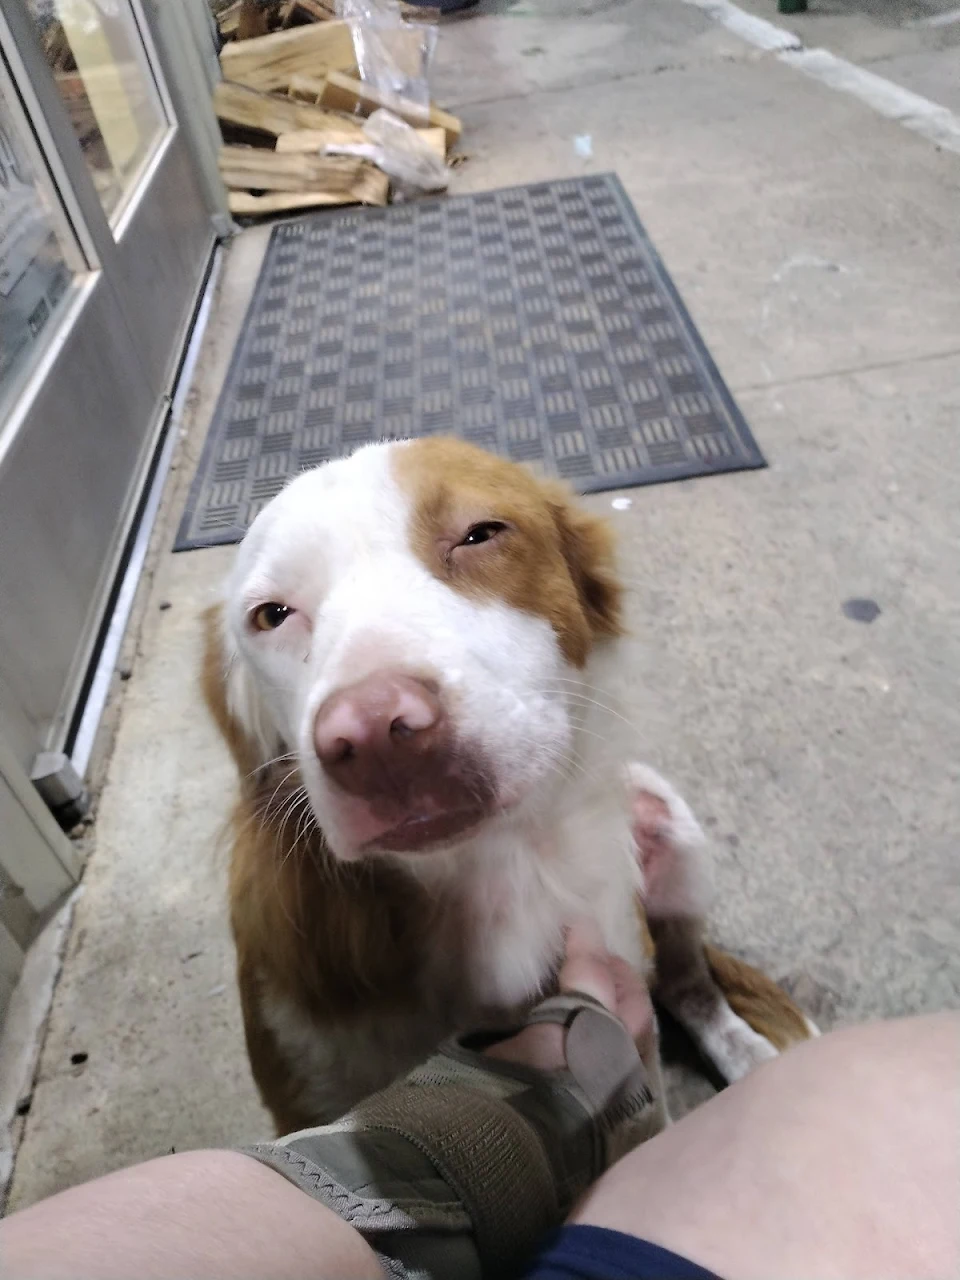 Goodest girl came up to me at work and let me give her some loves